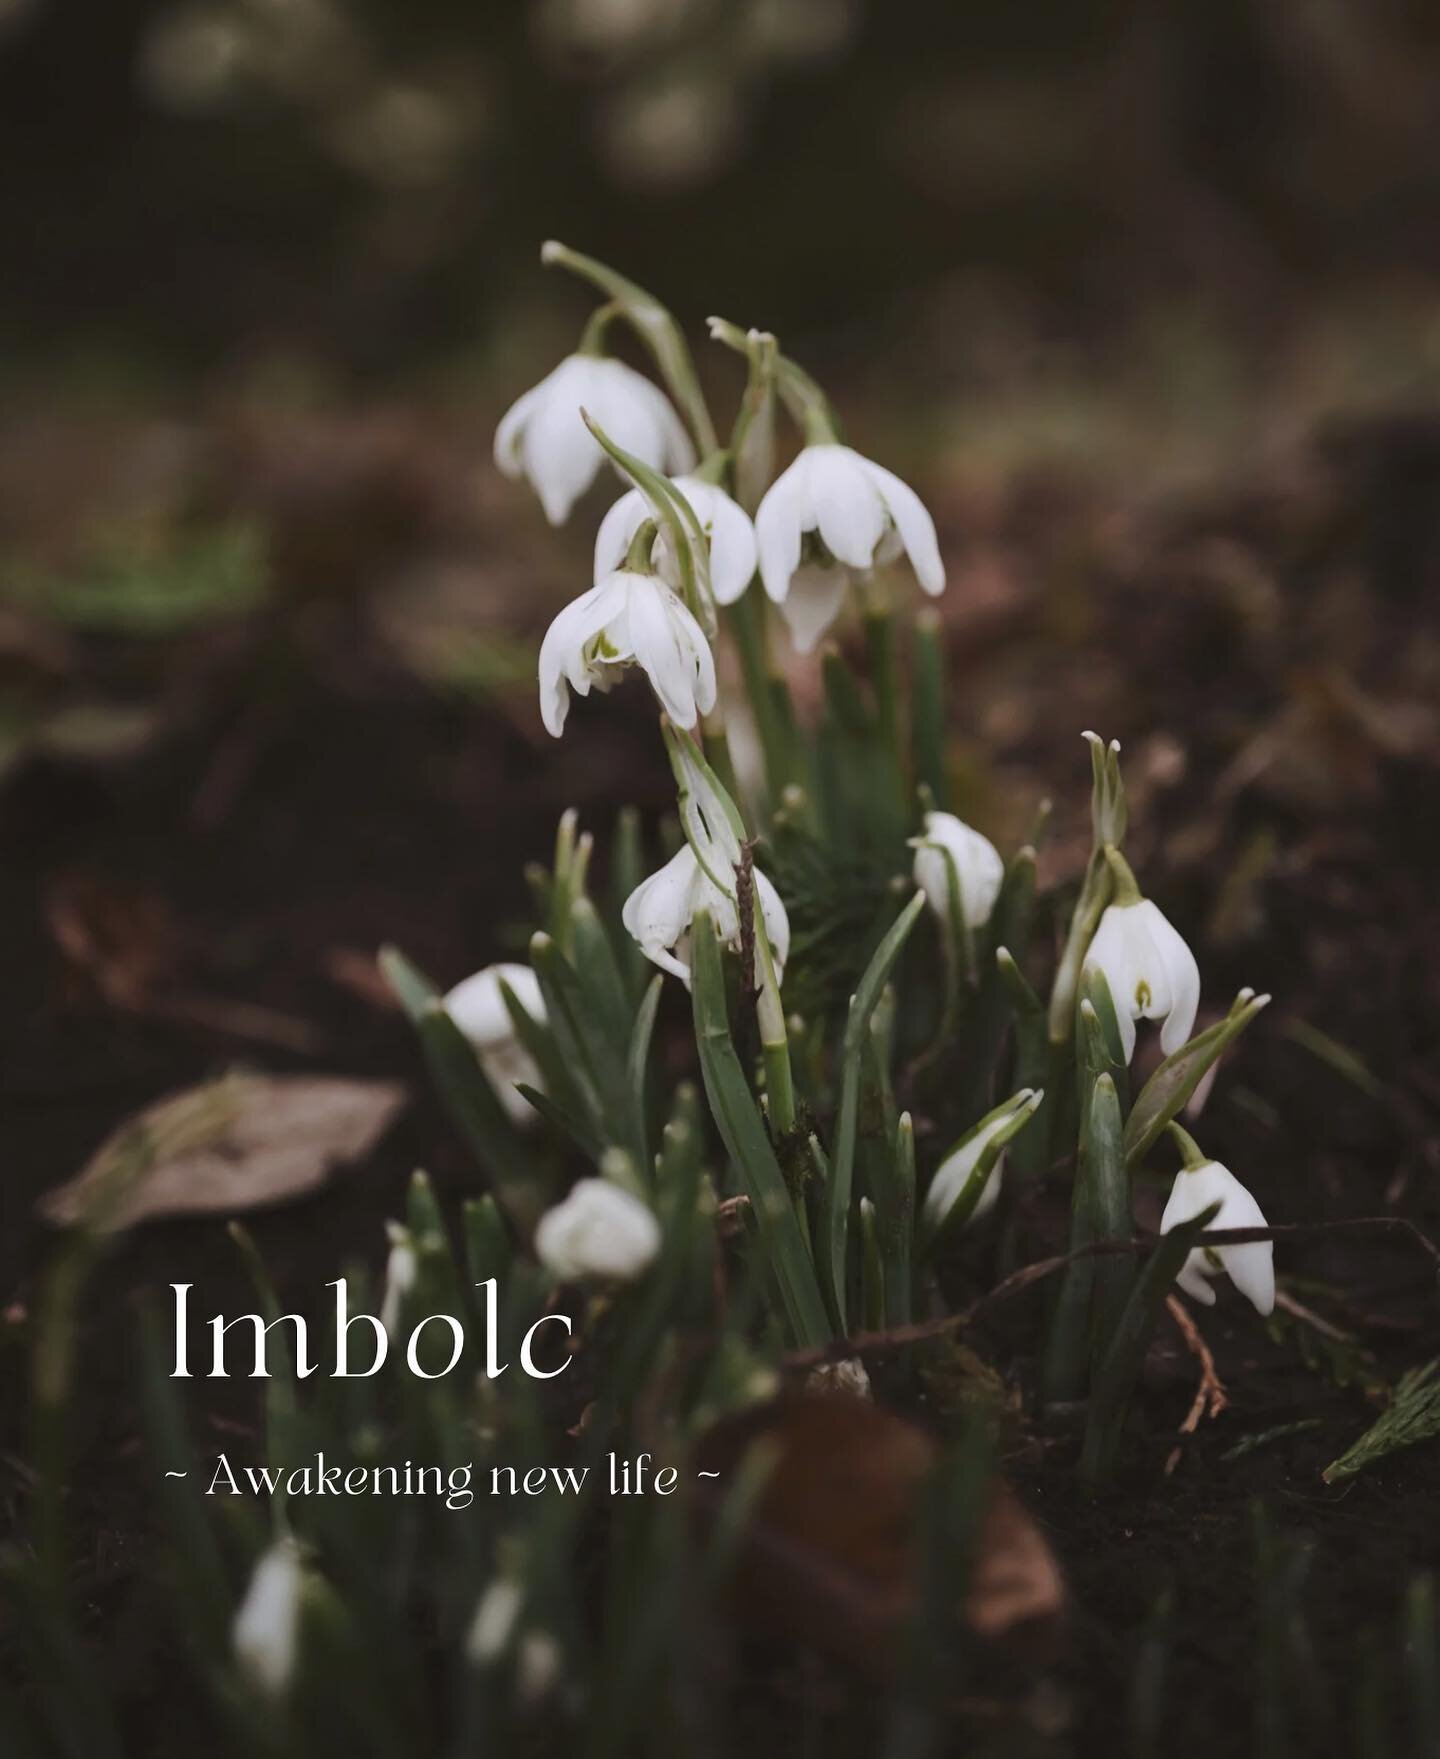 WomanKind Circle - Imbolc
Saturday 3rd February 
4:00 - 6:00 pm

&lsquo;What was sleeping now begins to stir. What was dormant now begins to awake.&rsquo;

As we embrace the energy of slow return, I invite you to my first WomanKind Circle of the year